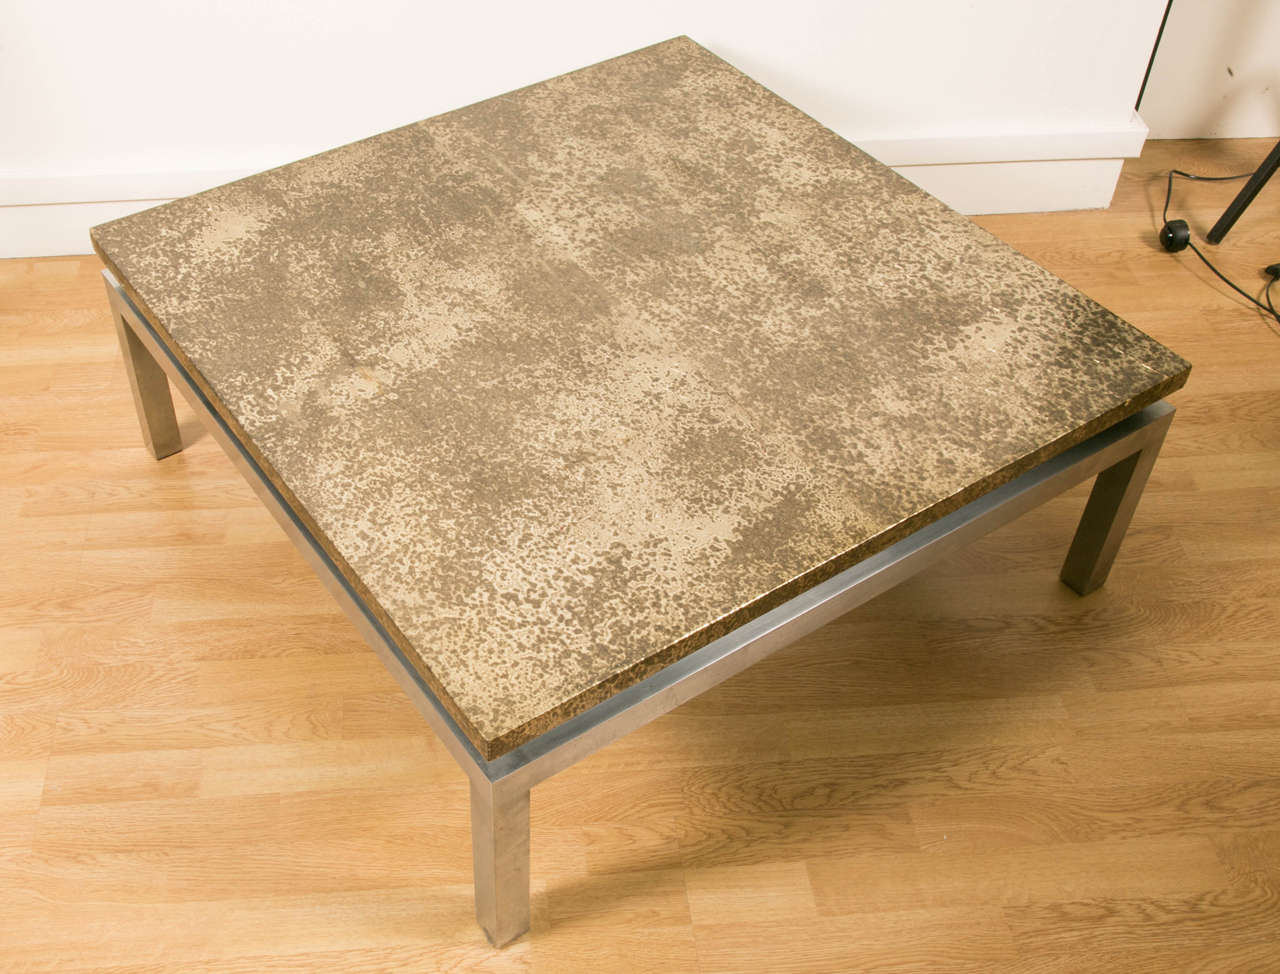 Large square coffee table with stainless steel base square section. Top covered with a sheet of acid oxidized brass coated with a clear lacquer cracked like the ancient Chinese lacquer. 1970s work.